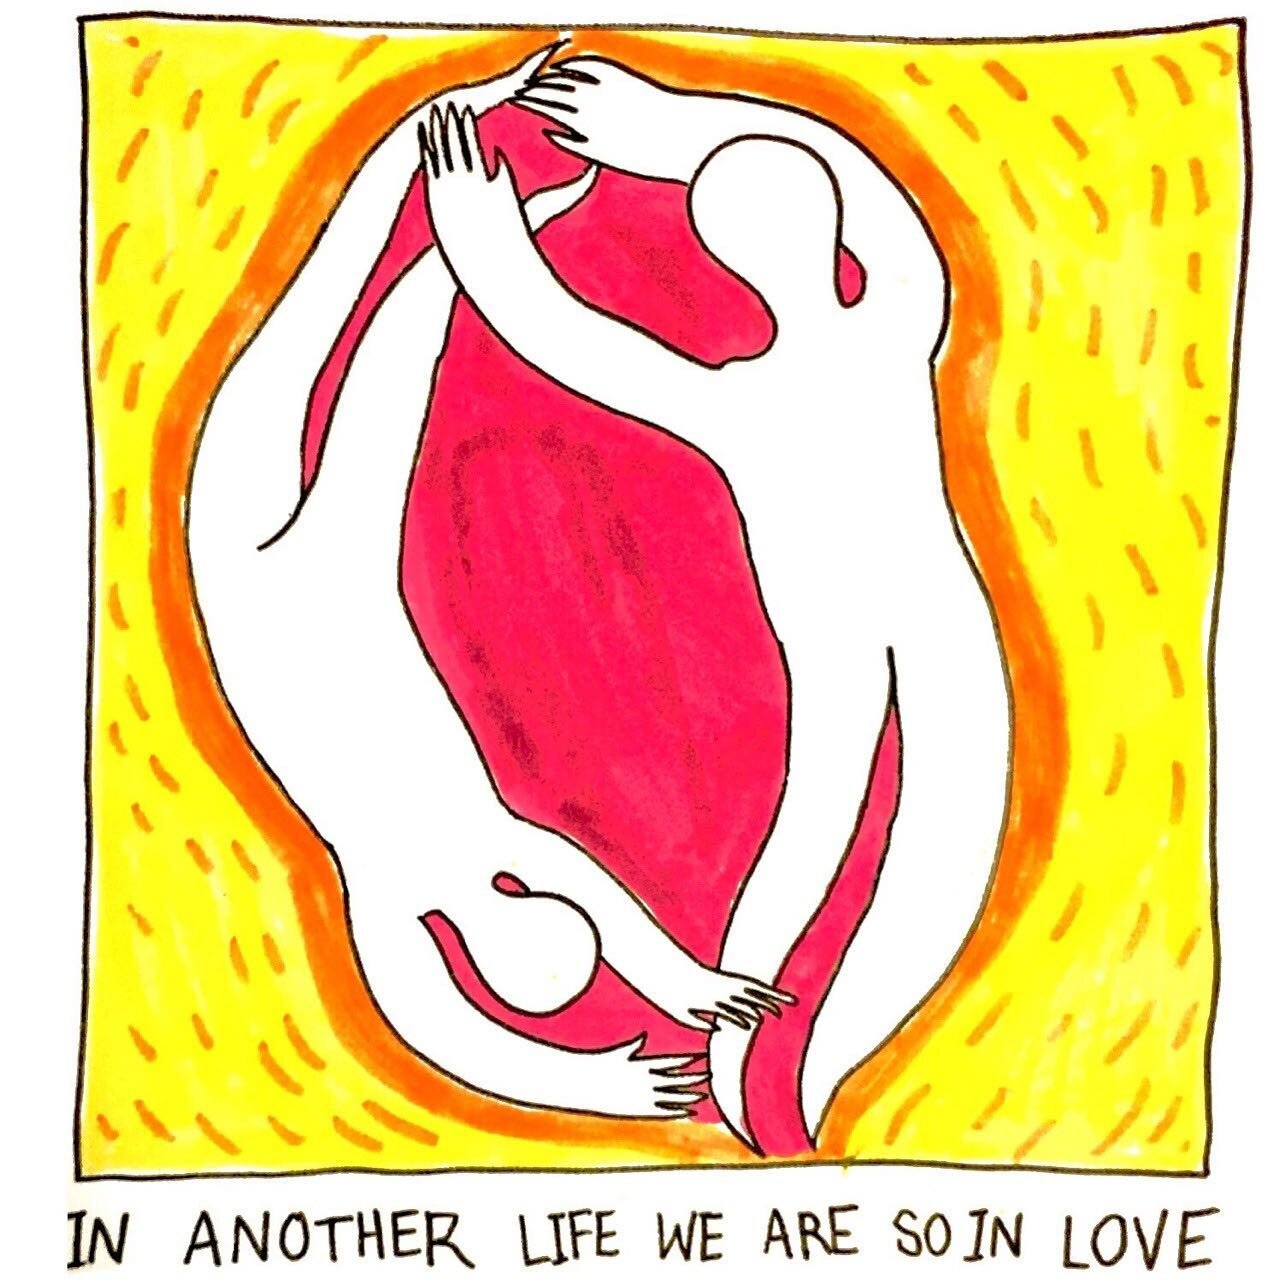 In another life we are so in love / in this one I had to give you up. 

(From 2019)